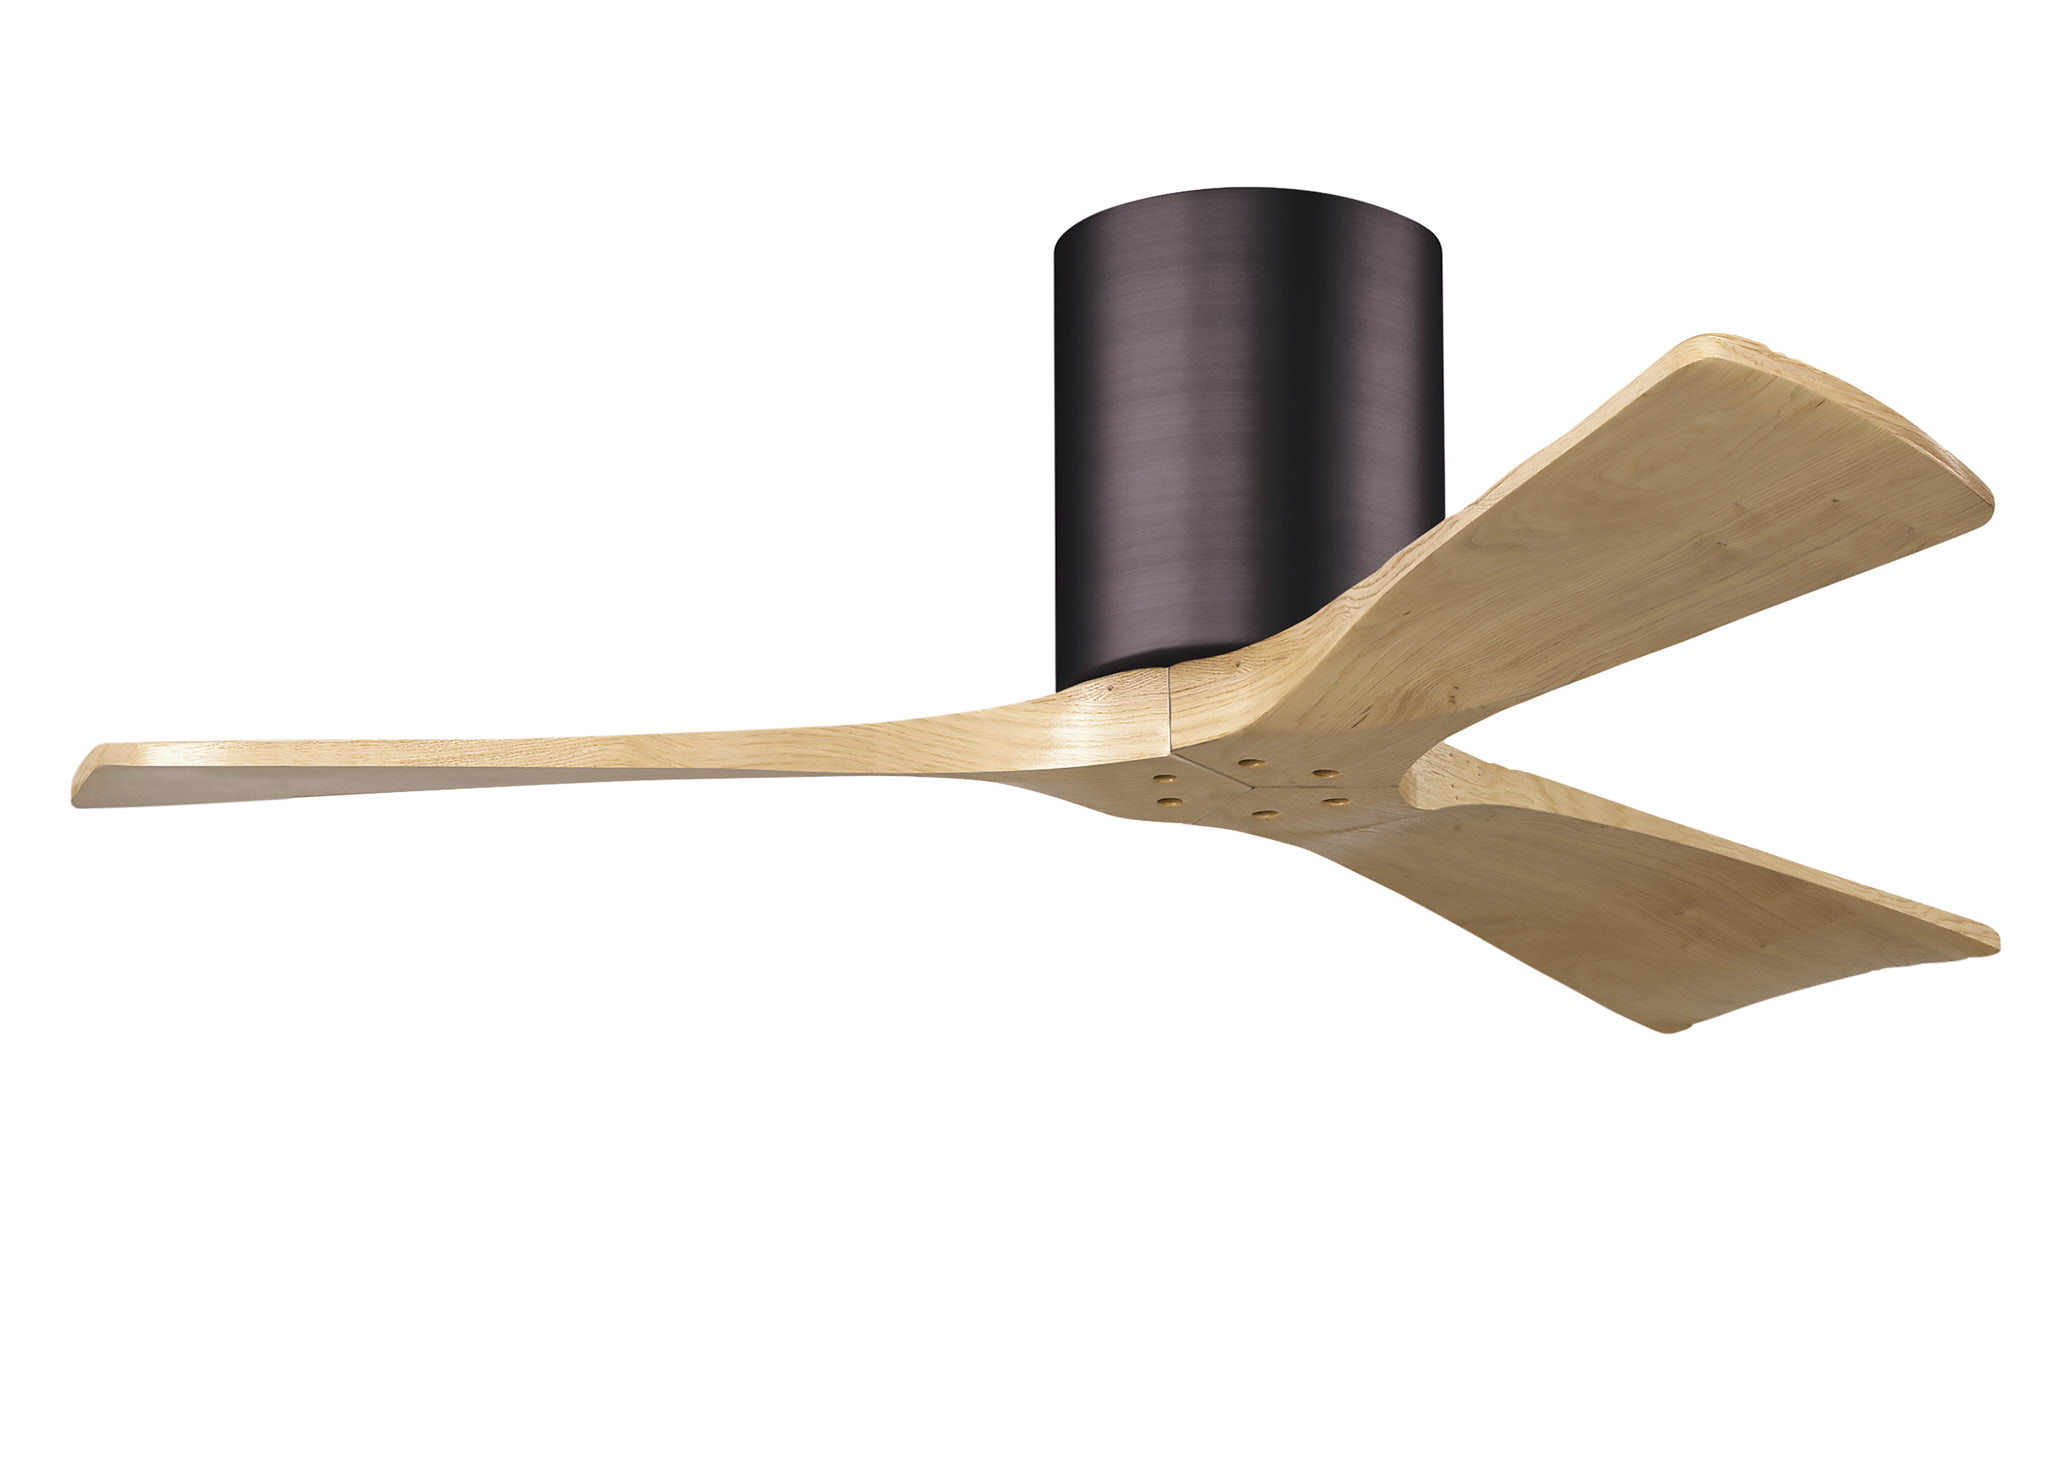 Irene-3H 6-speed ceiling fan in brushed bronze finish with 42